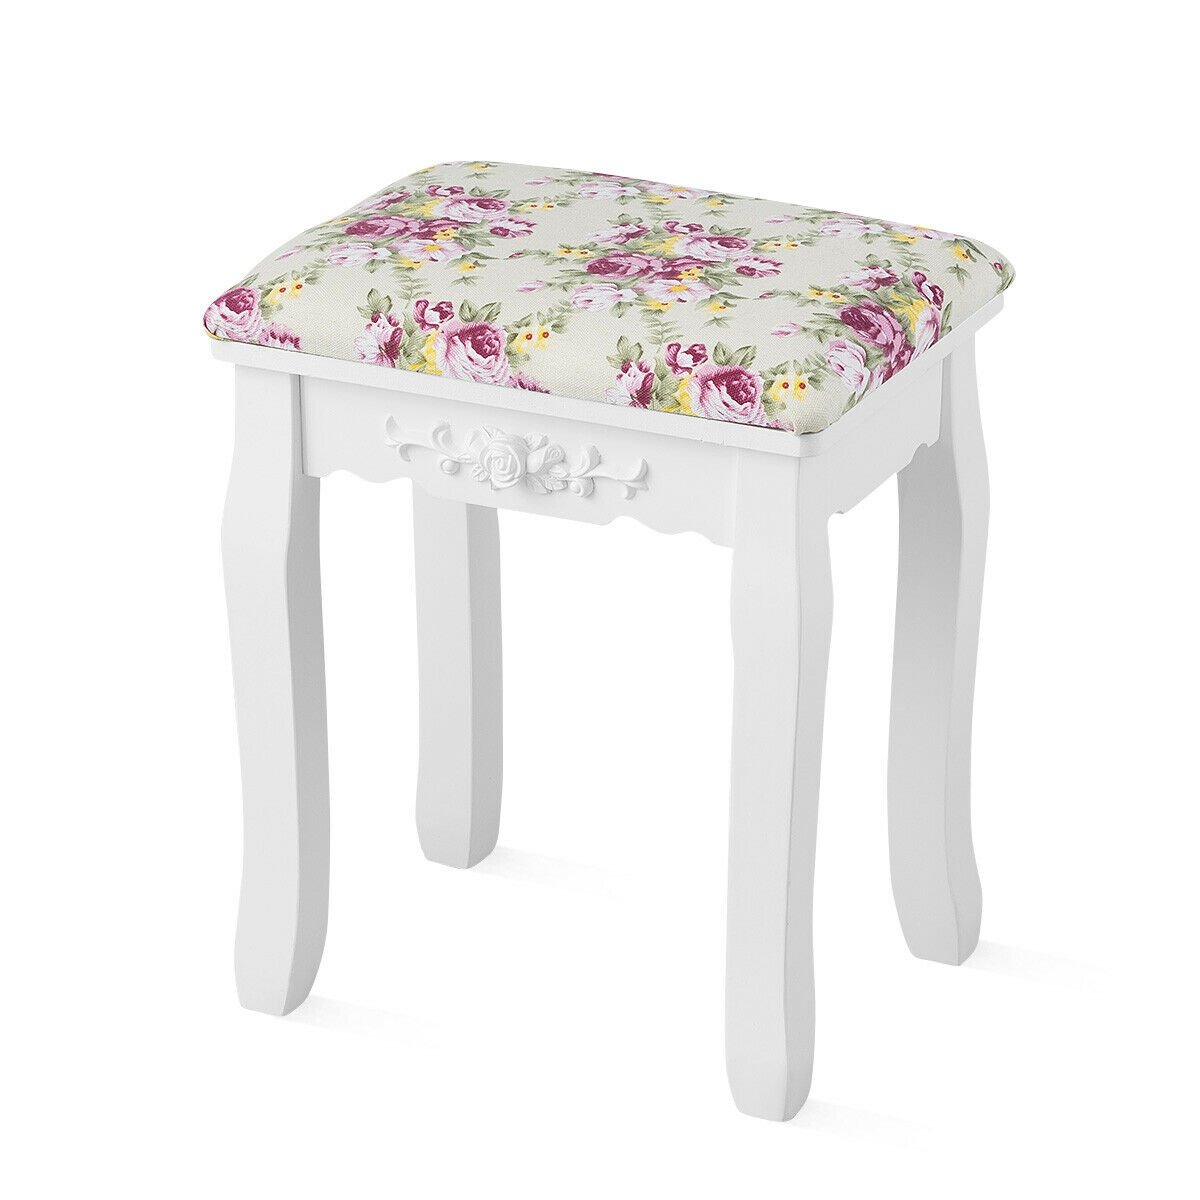 Makeup Dressing Table and Bench 3 Drawers and Cushioned Stool for Girls, White - Gallery Canada